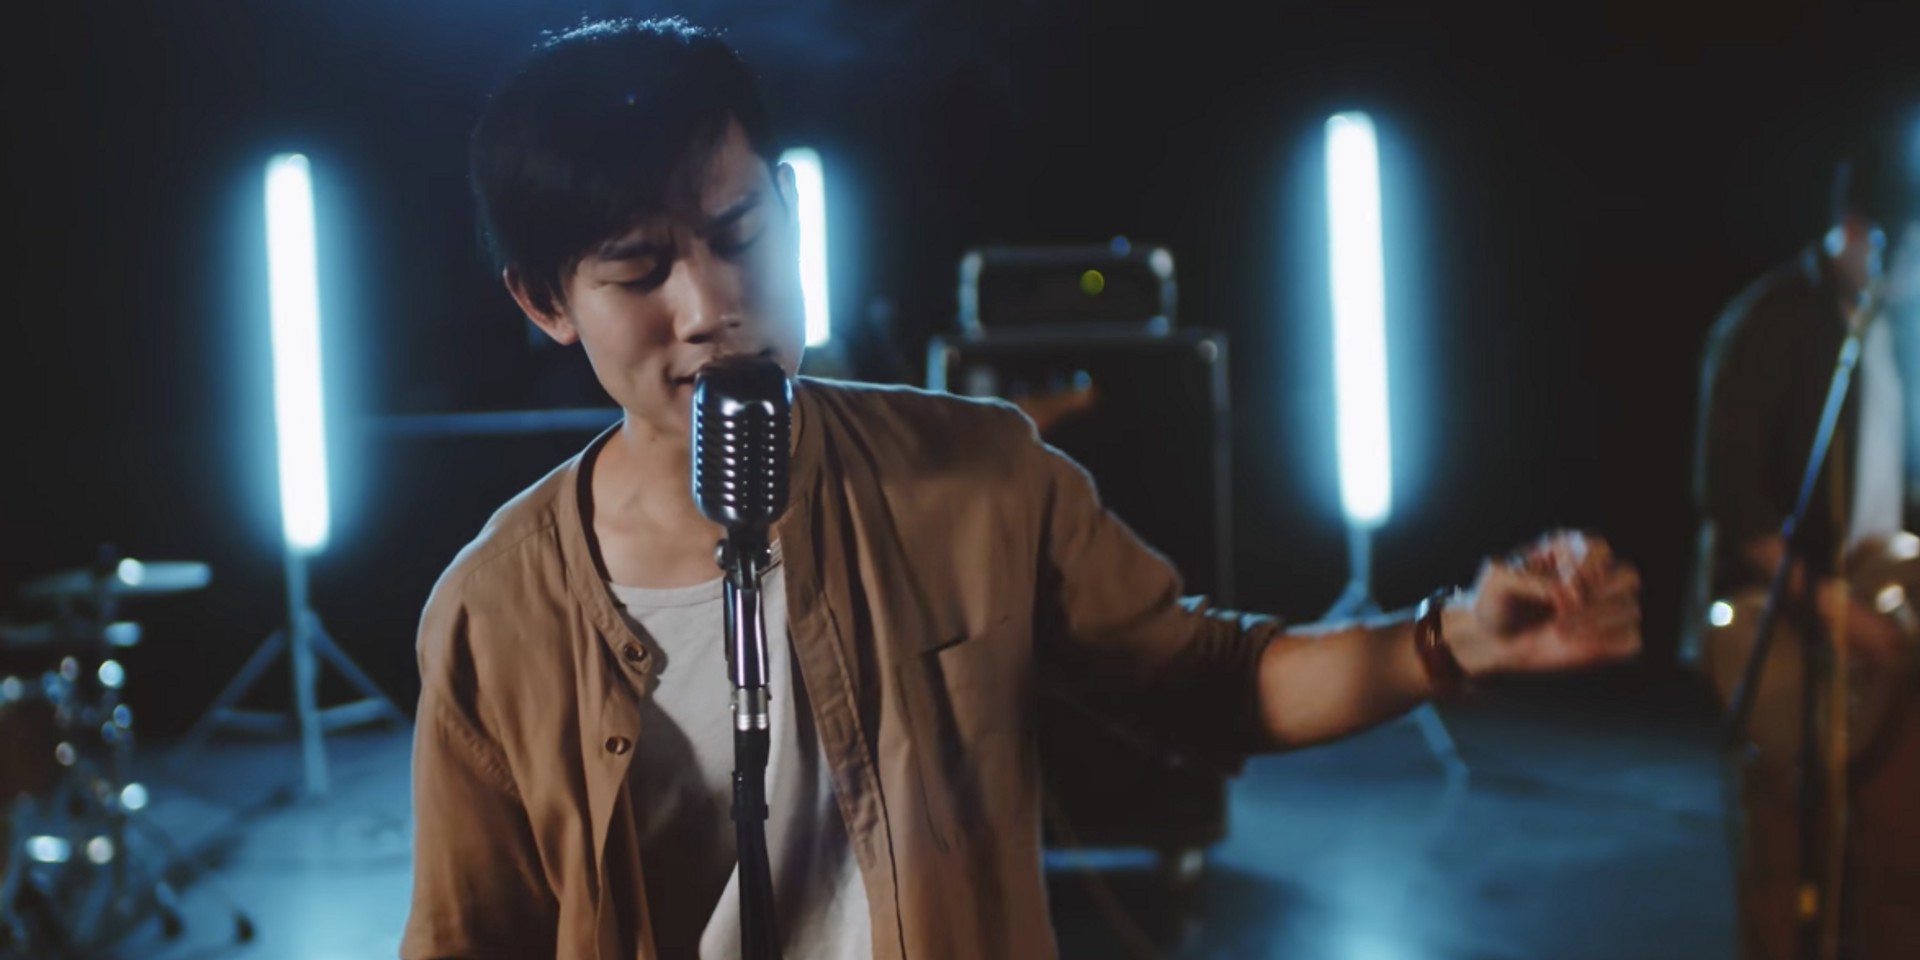 Cadence tackle mixed emotions in music video for 'Pendulum' – watch